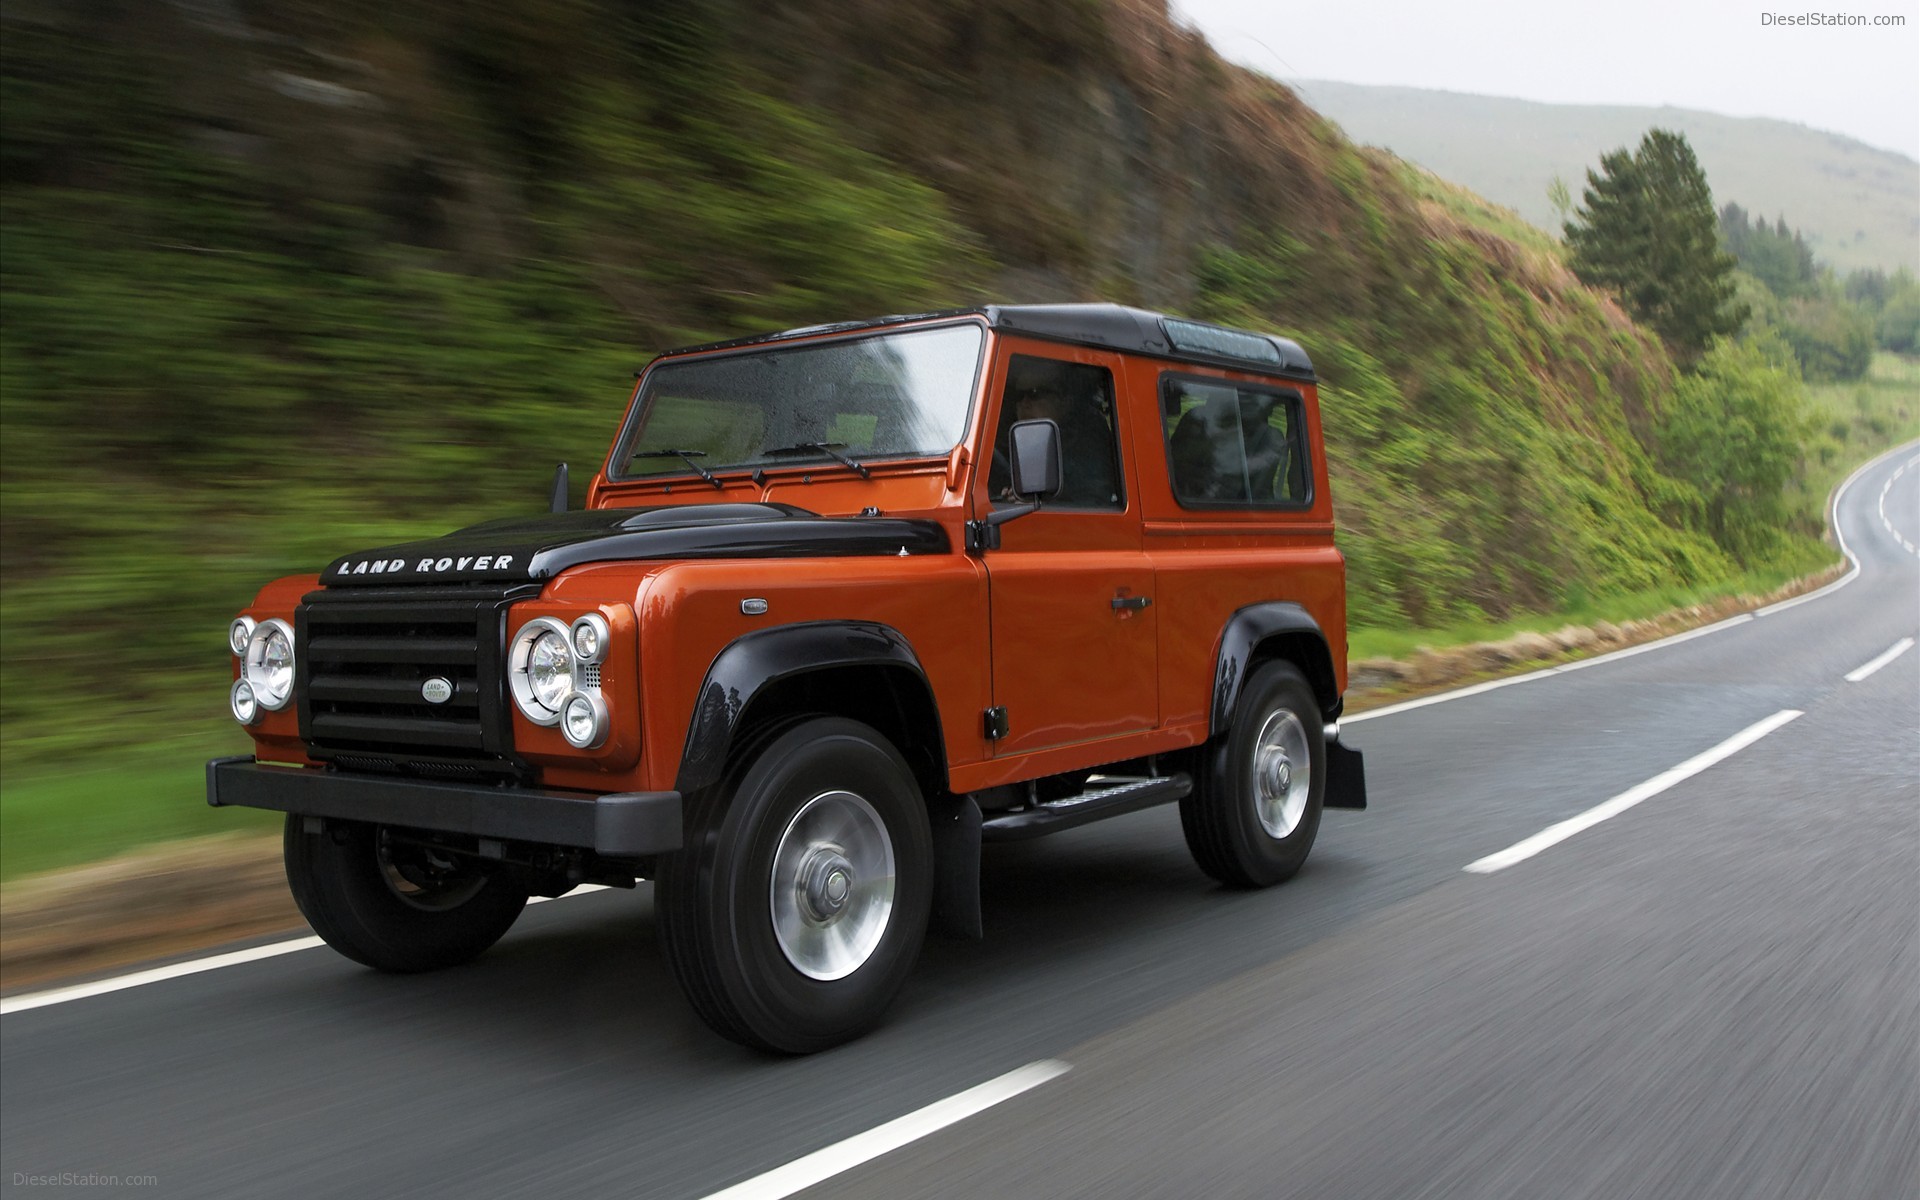 Land Rover Defender Fire & Ice - Fire And Ice Defender 110 , HD Wallpaper & Backgrounds